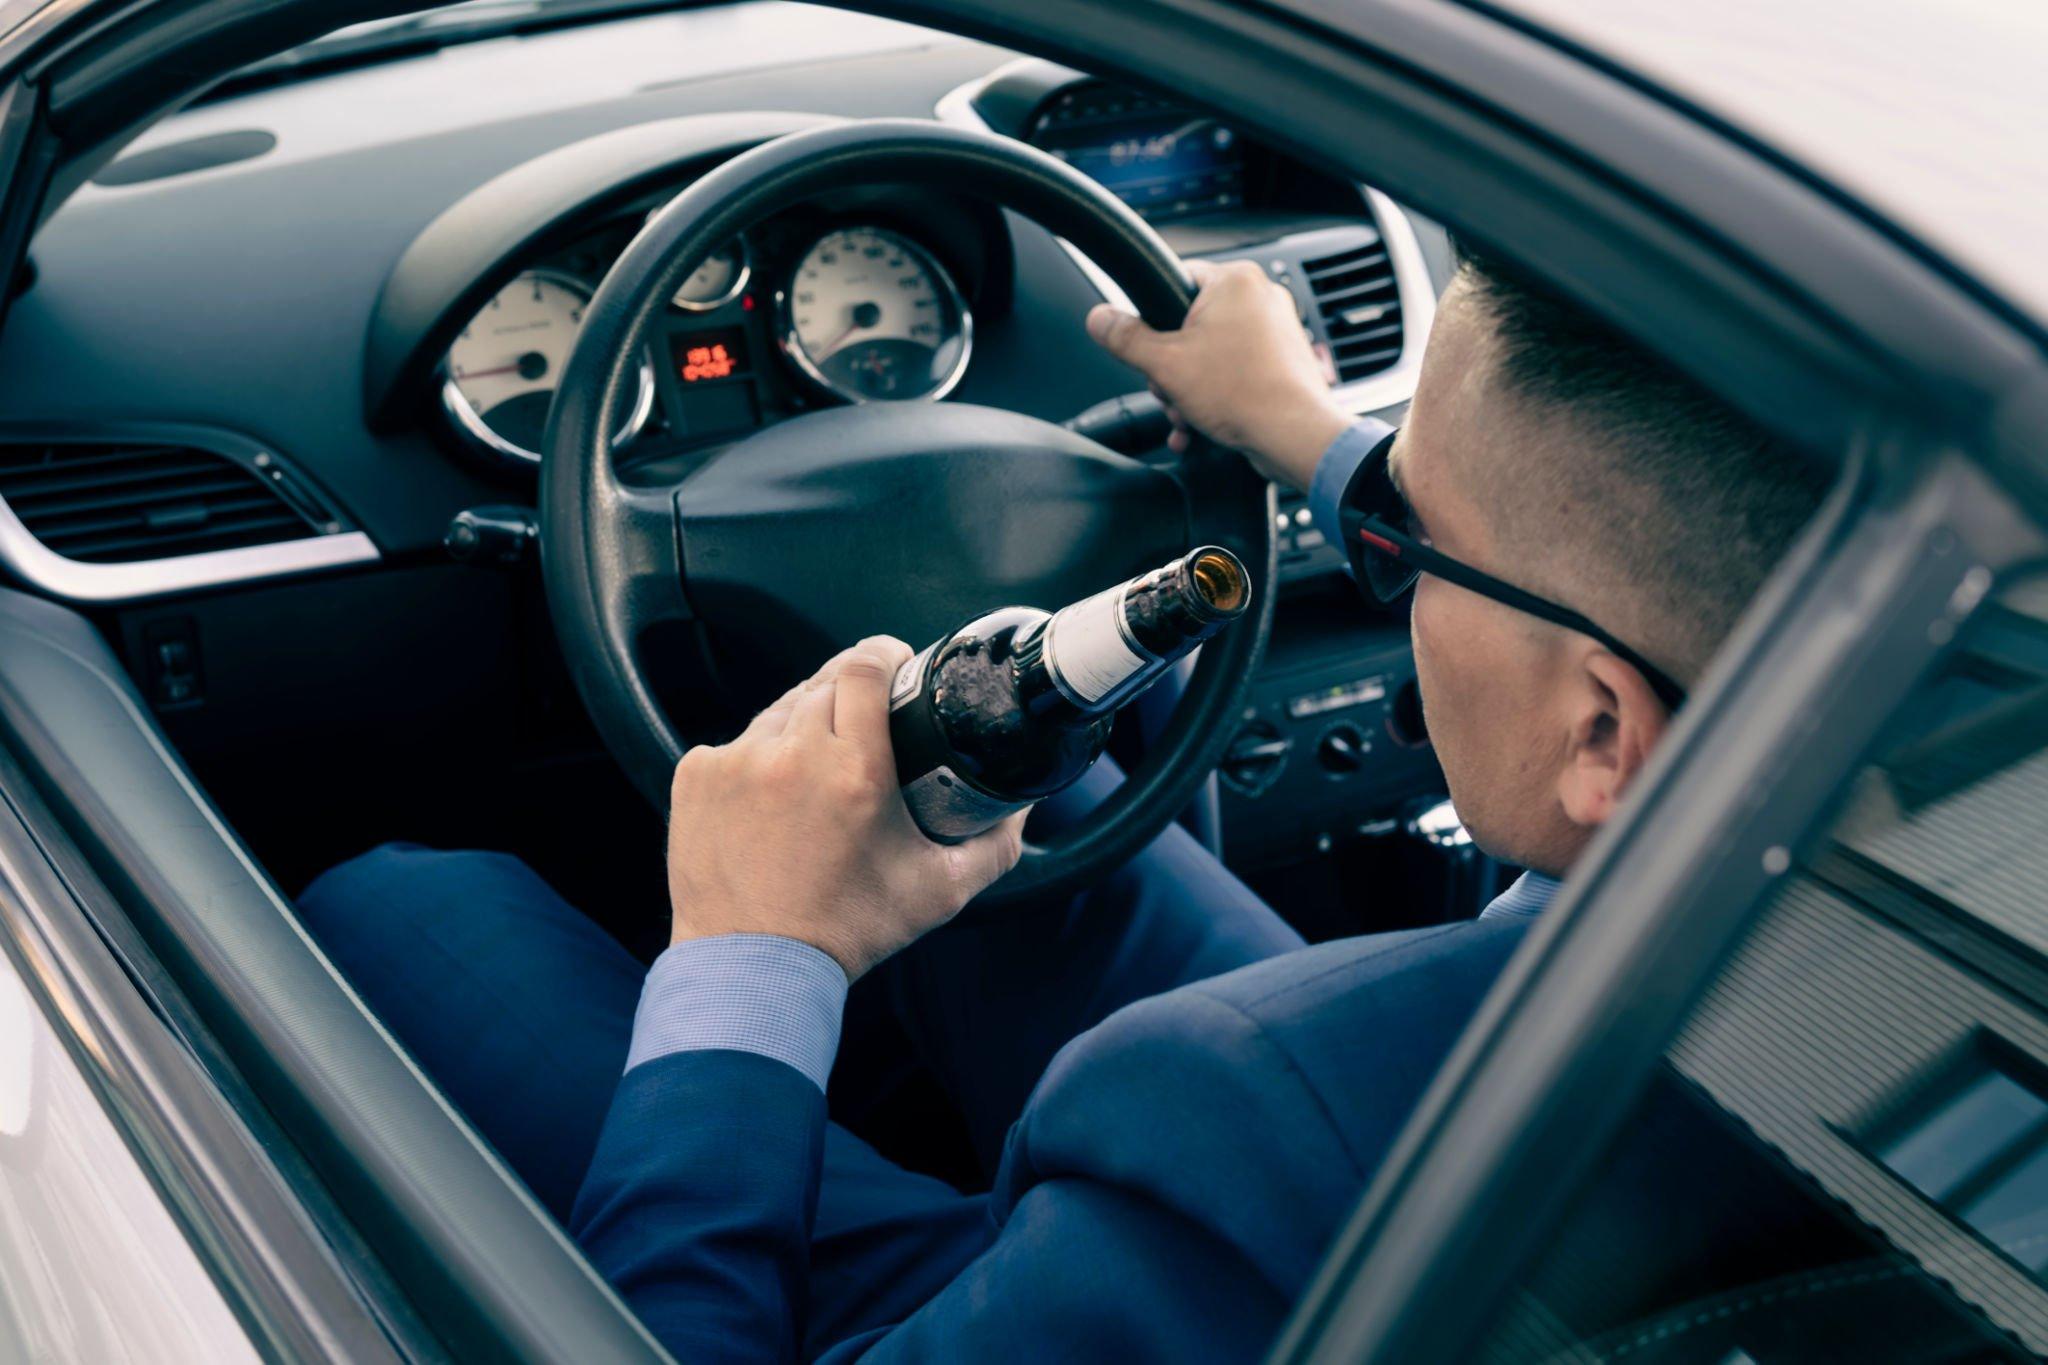 Look For an Experienced DUI Lawyer In Nevada To Have a Competent Representation